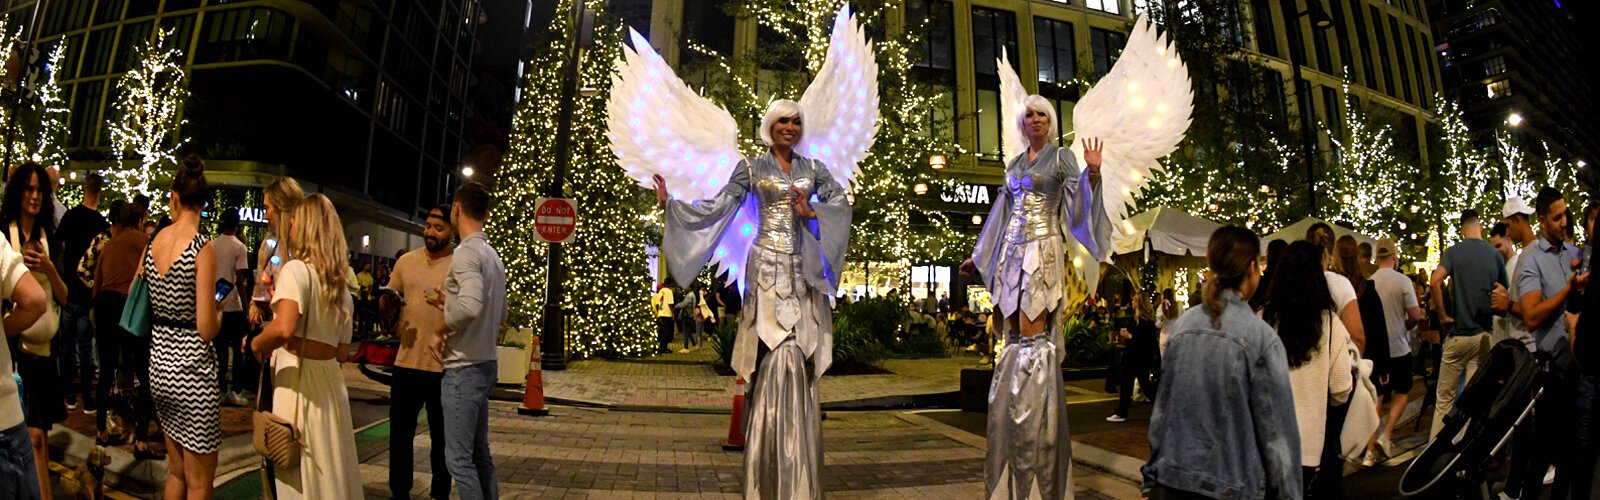 Another beautiful set of angels on stilts mingle with the crowd at Water Street Tampa during the Season Spectacular.